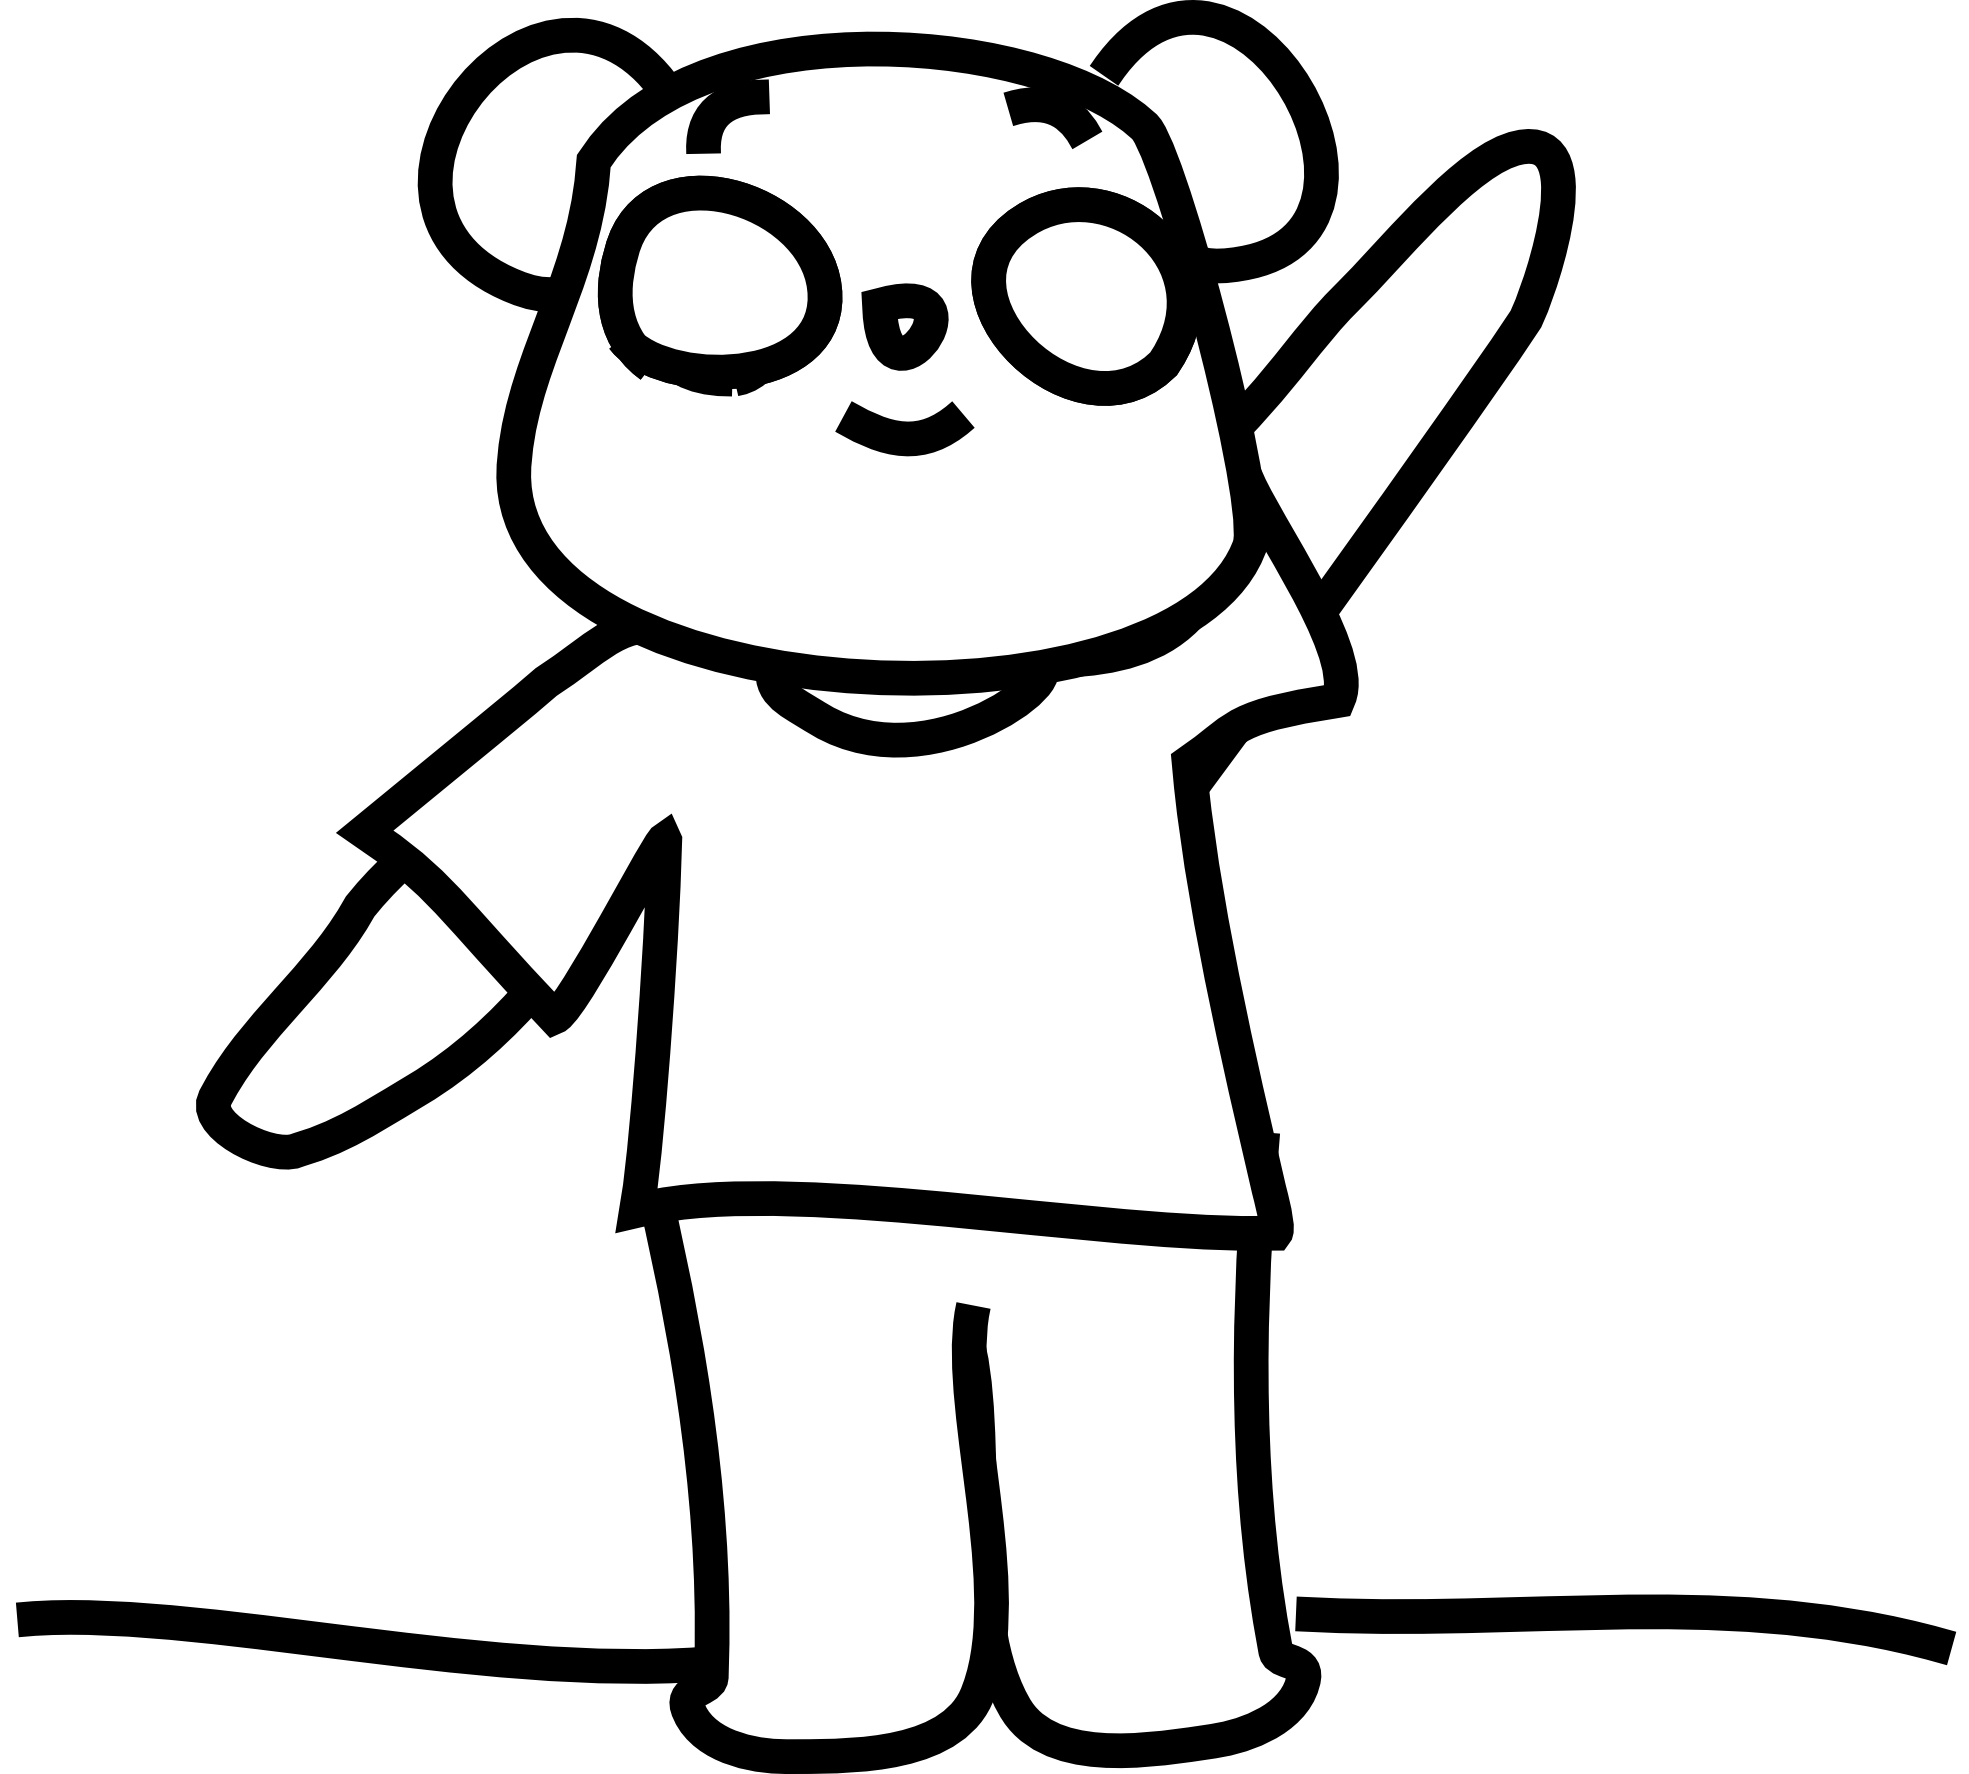 Teddy bear clipart black and white